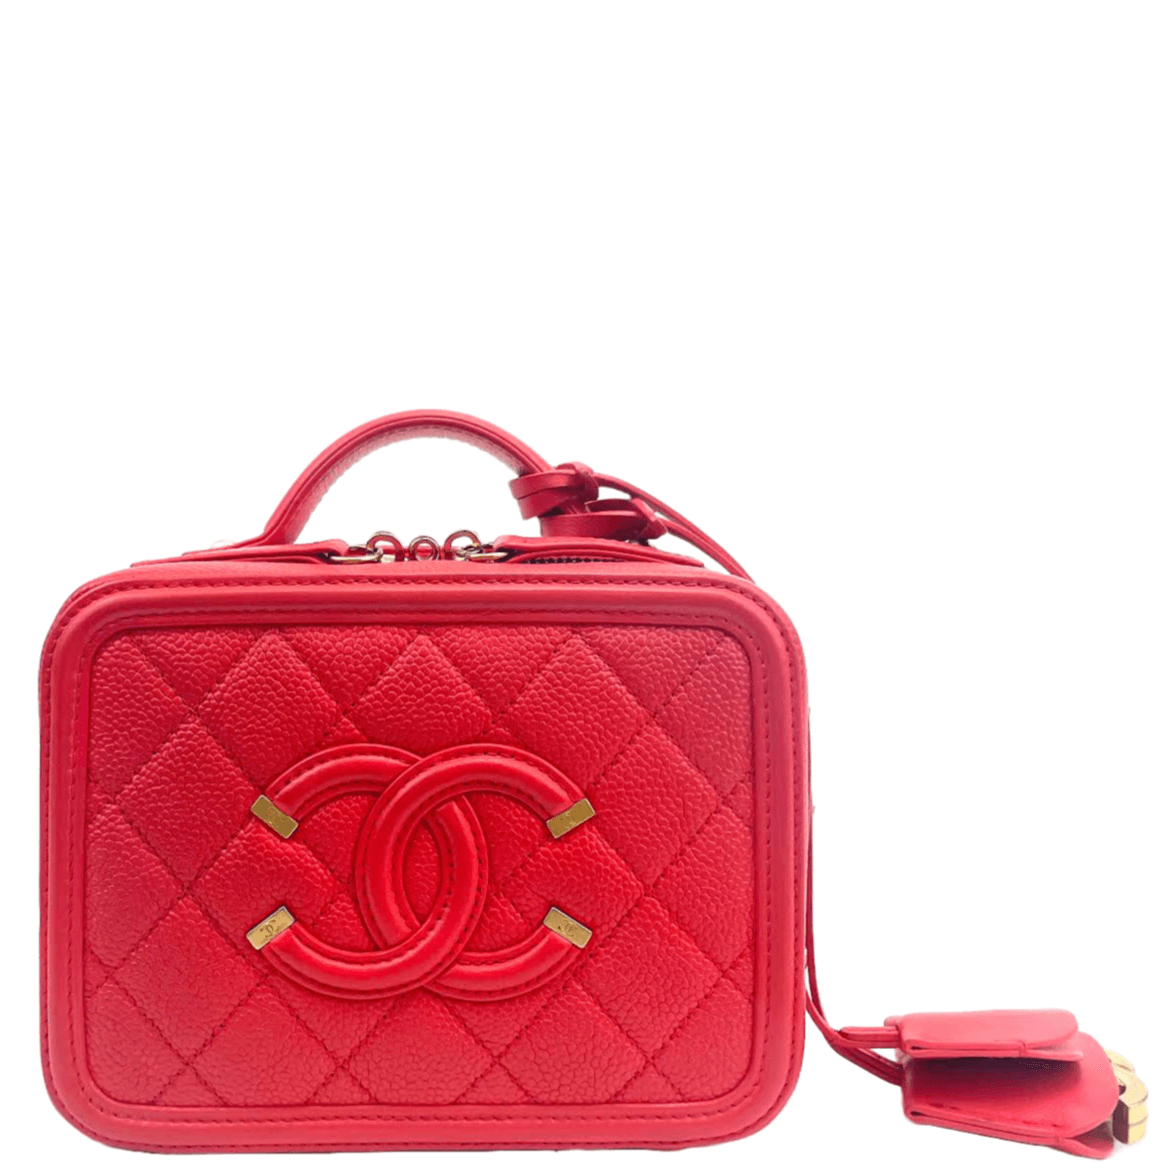 mademoiselle chanel purse authentic